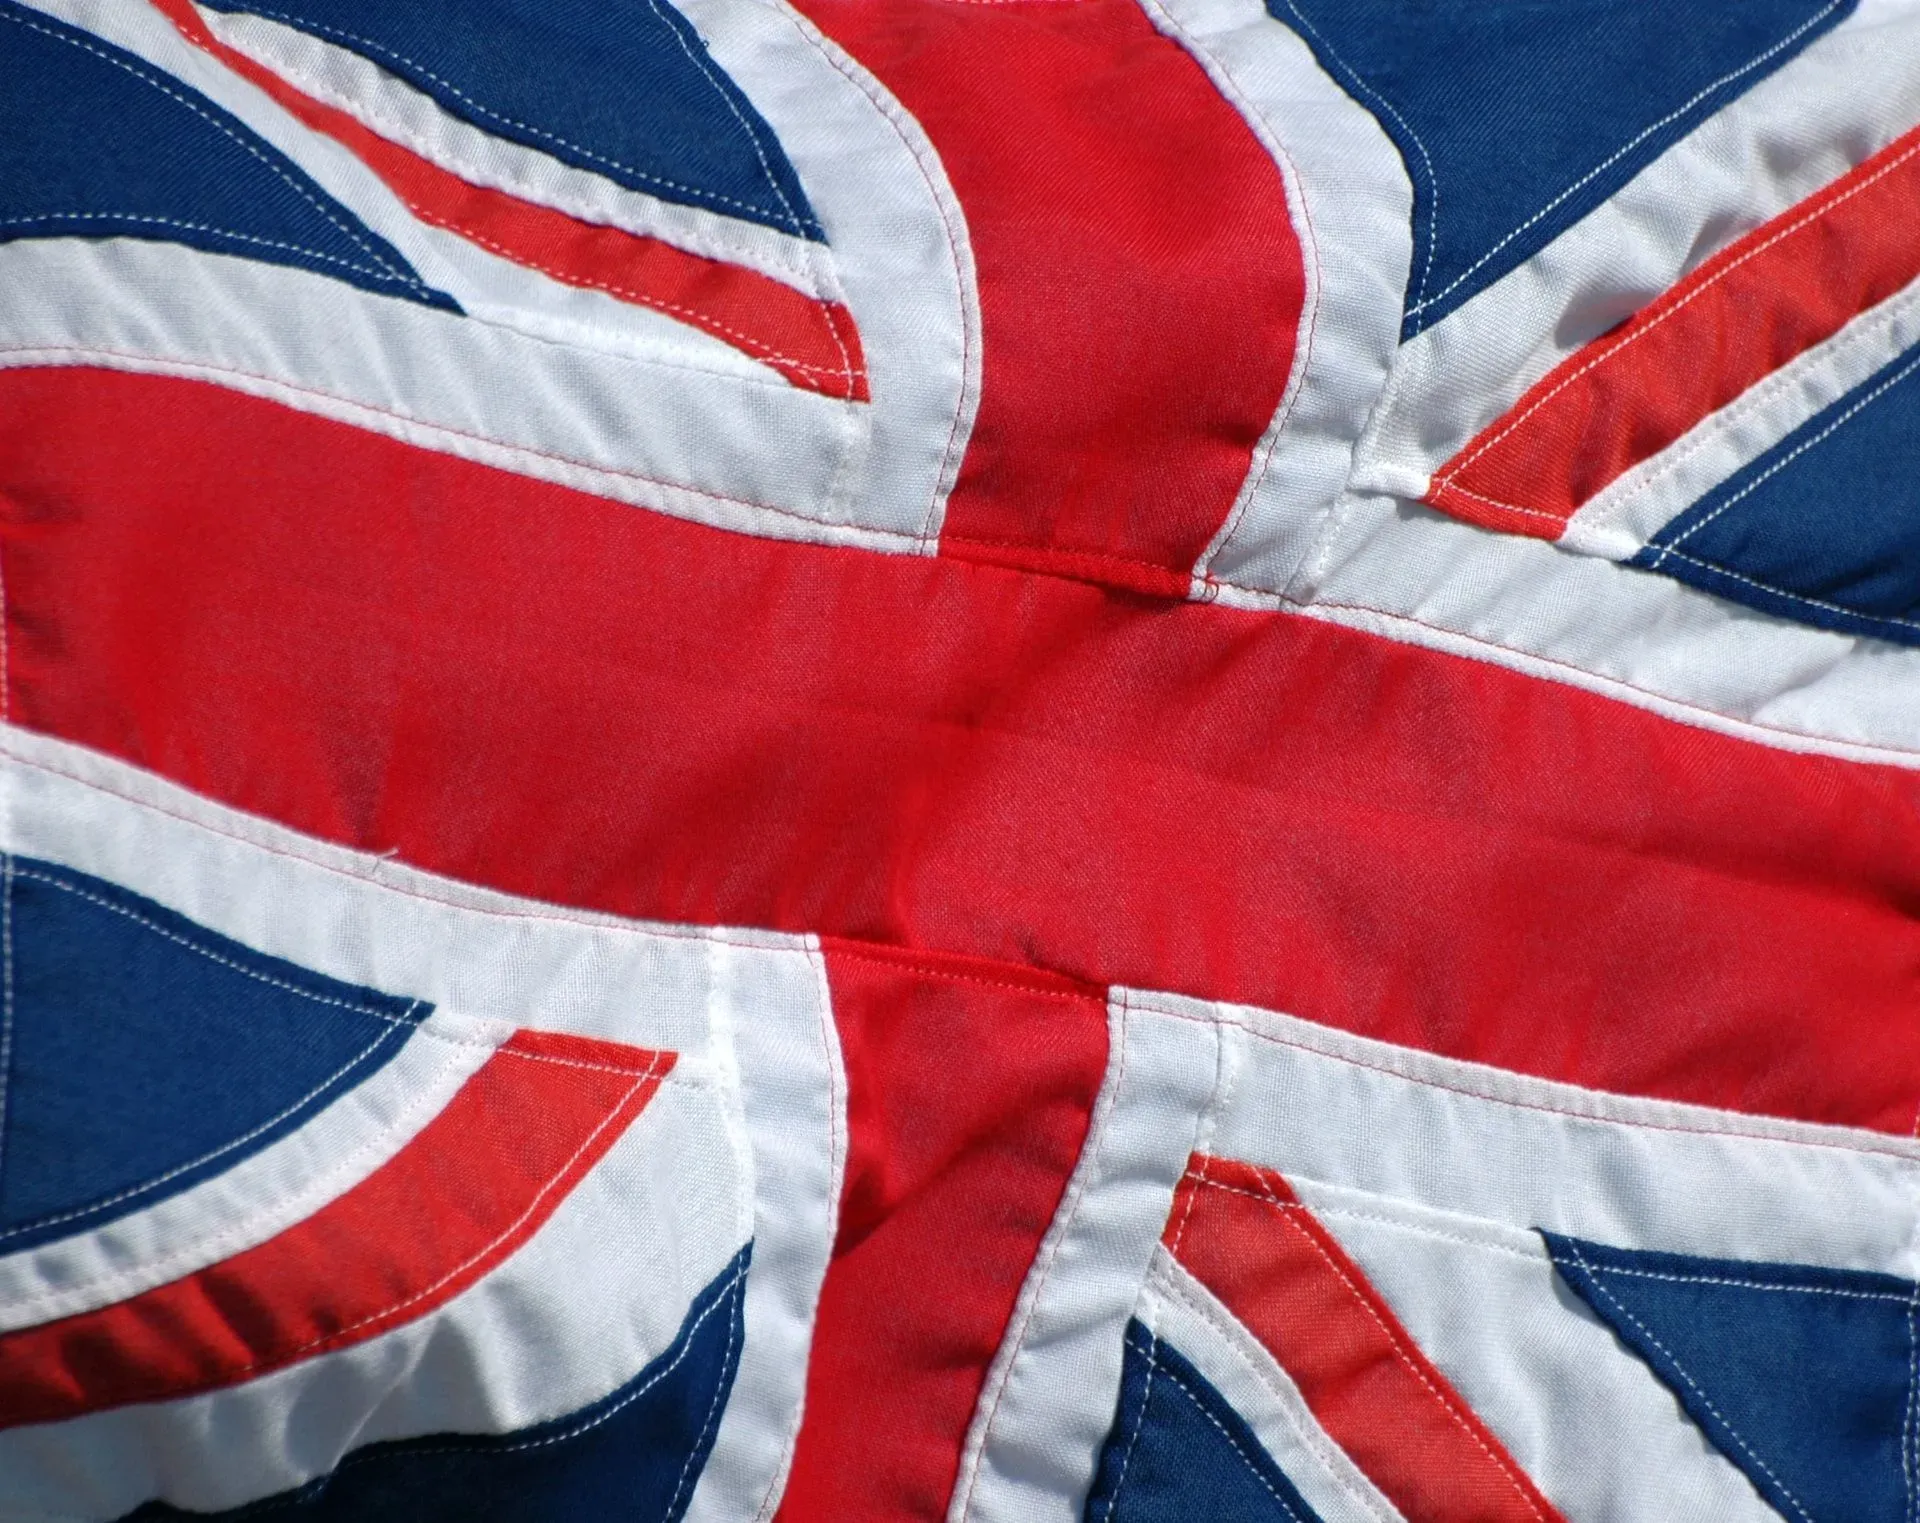 When it come to the Union Jack, the Saint George symbol is a very important element of the flag.